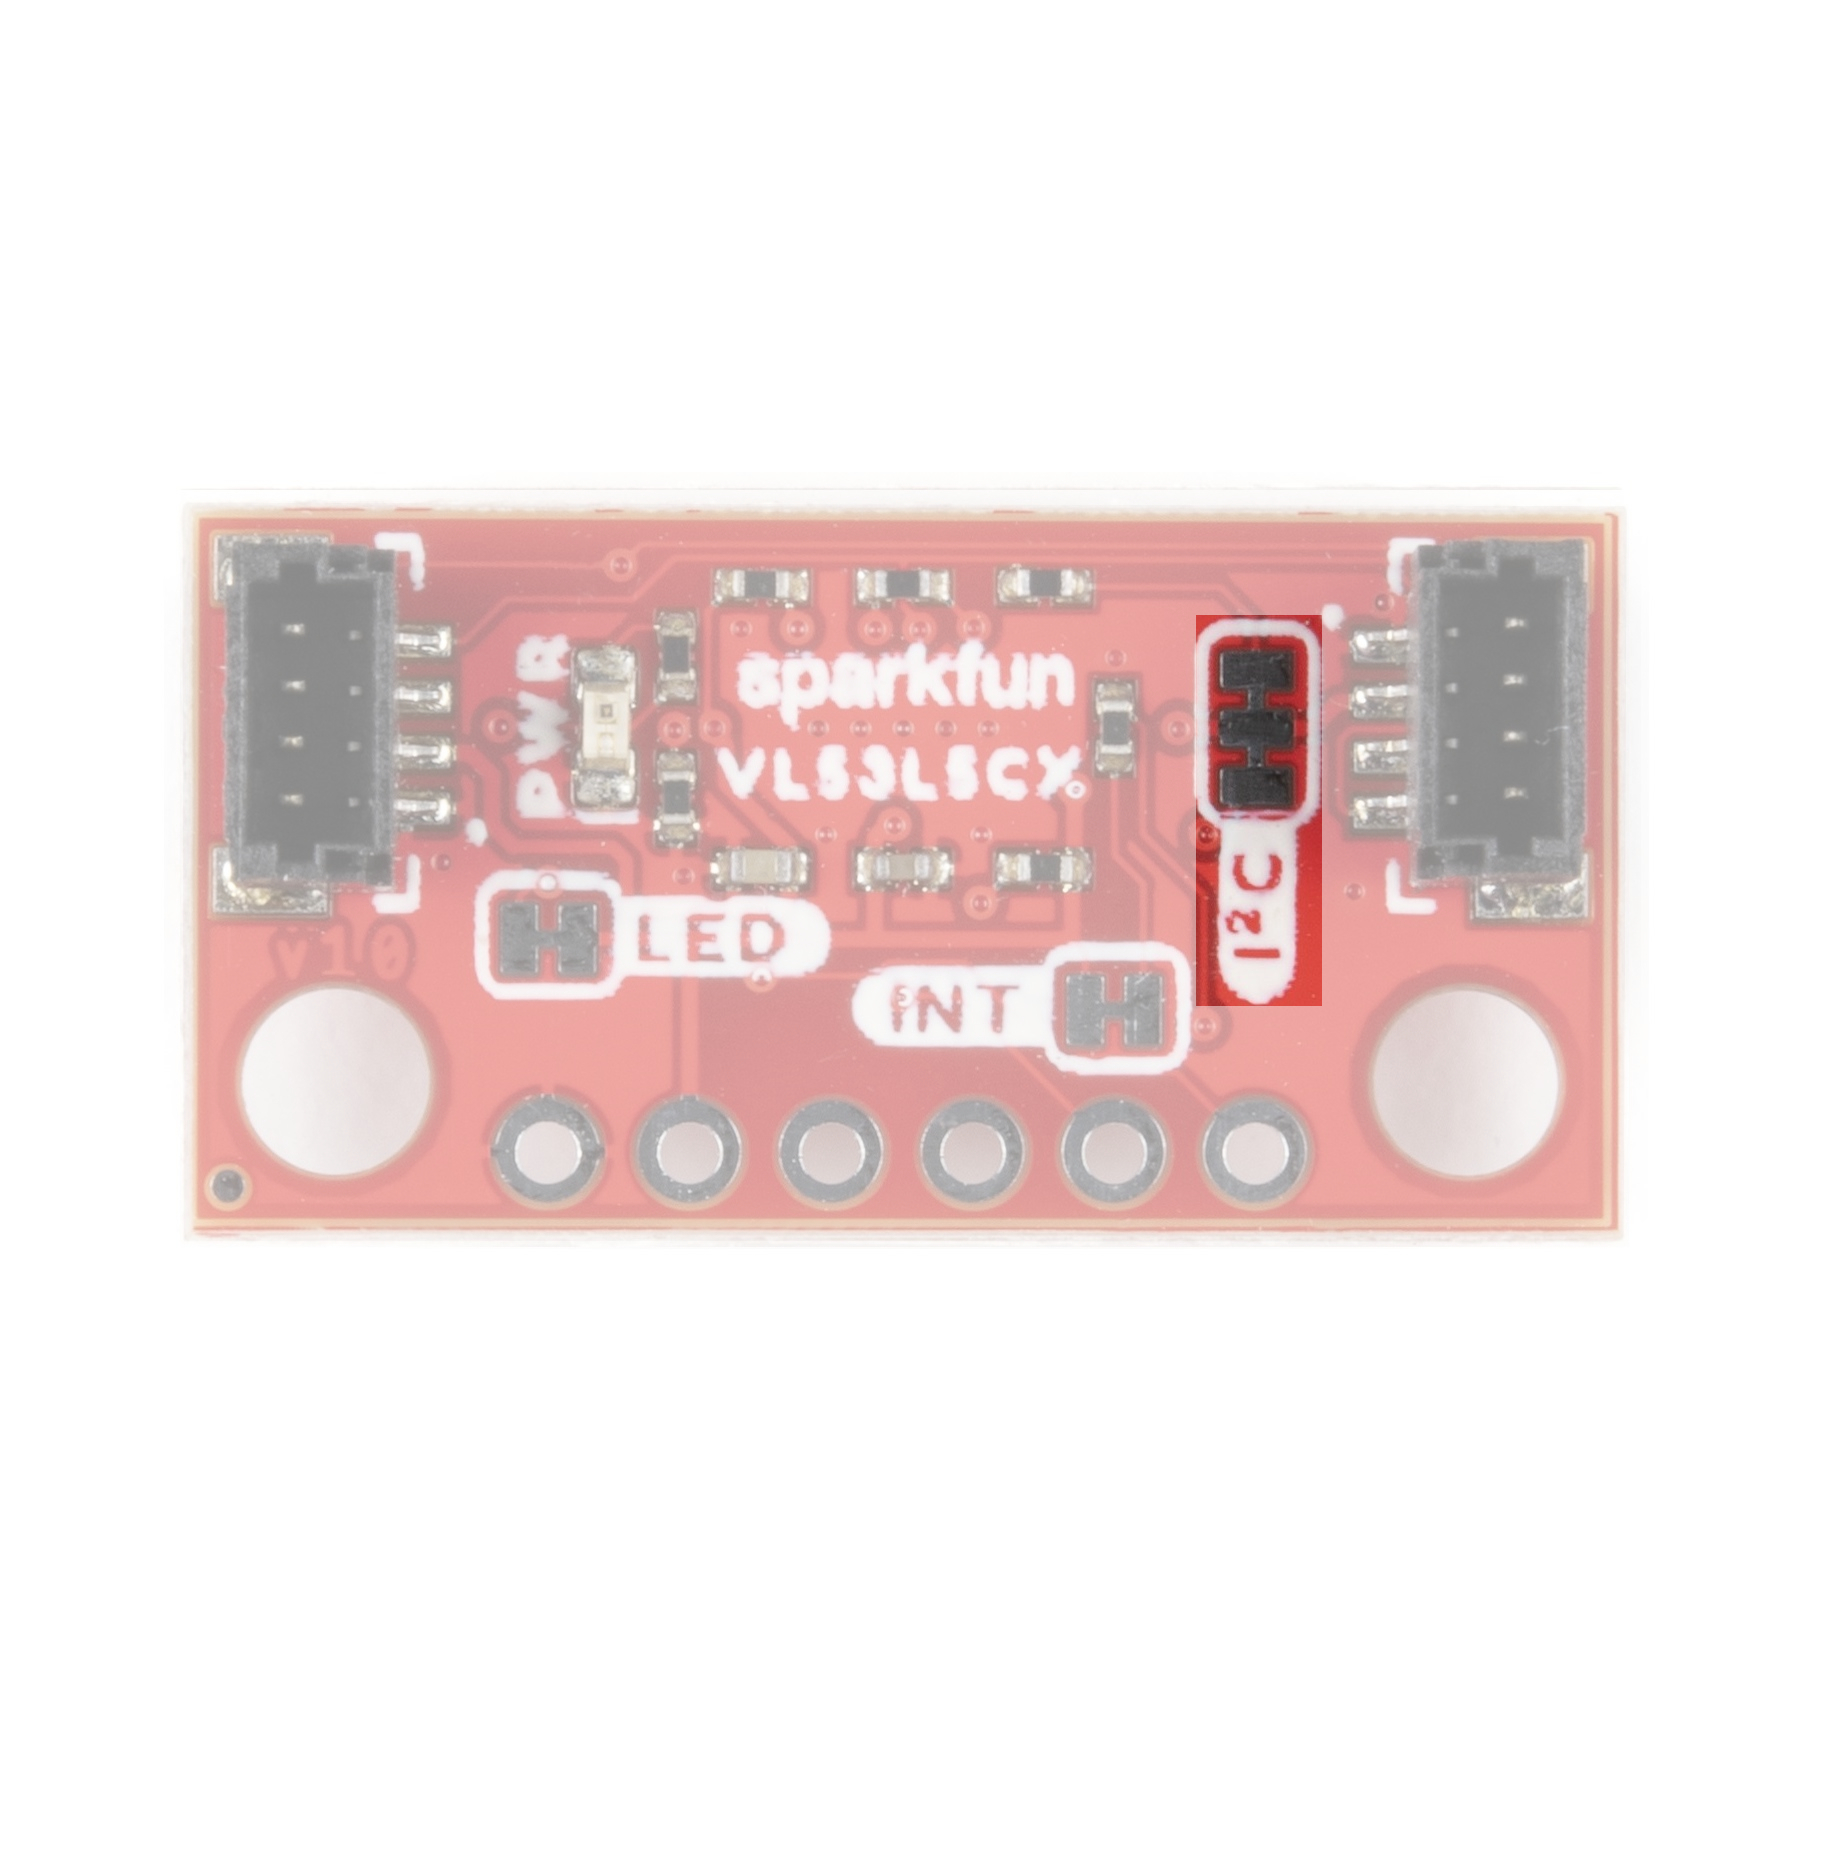 The I2C jumper is on the right side of the back of the board near the qwiic connector